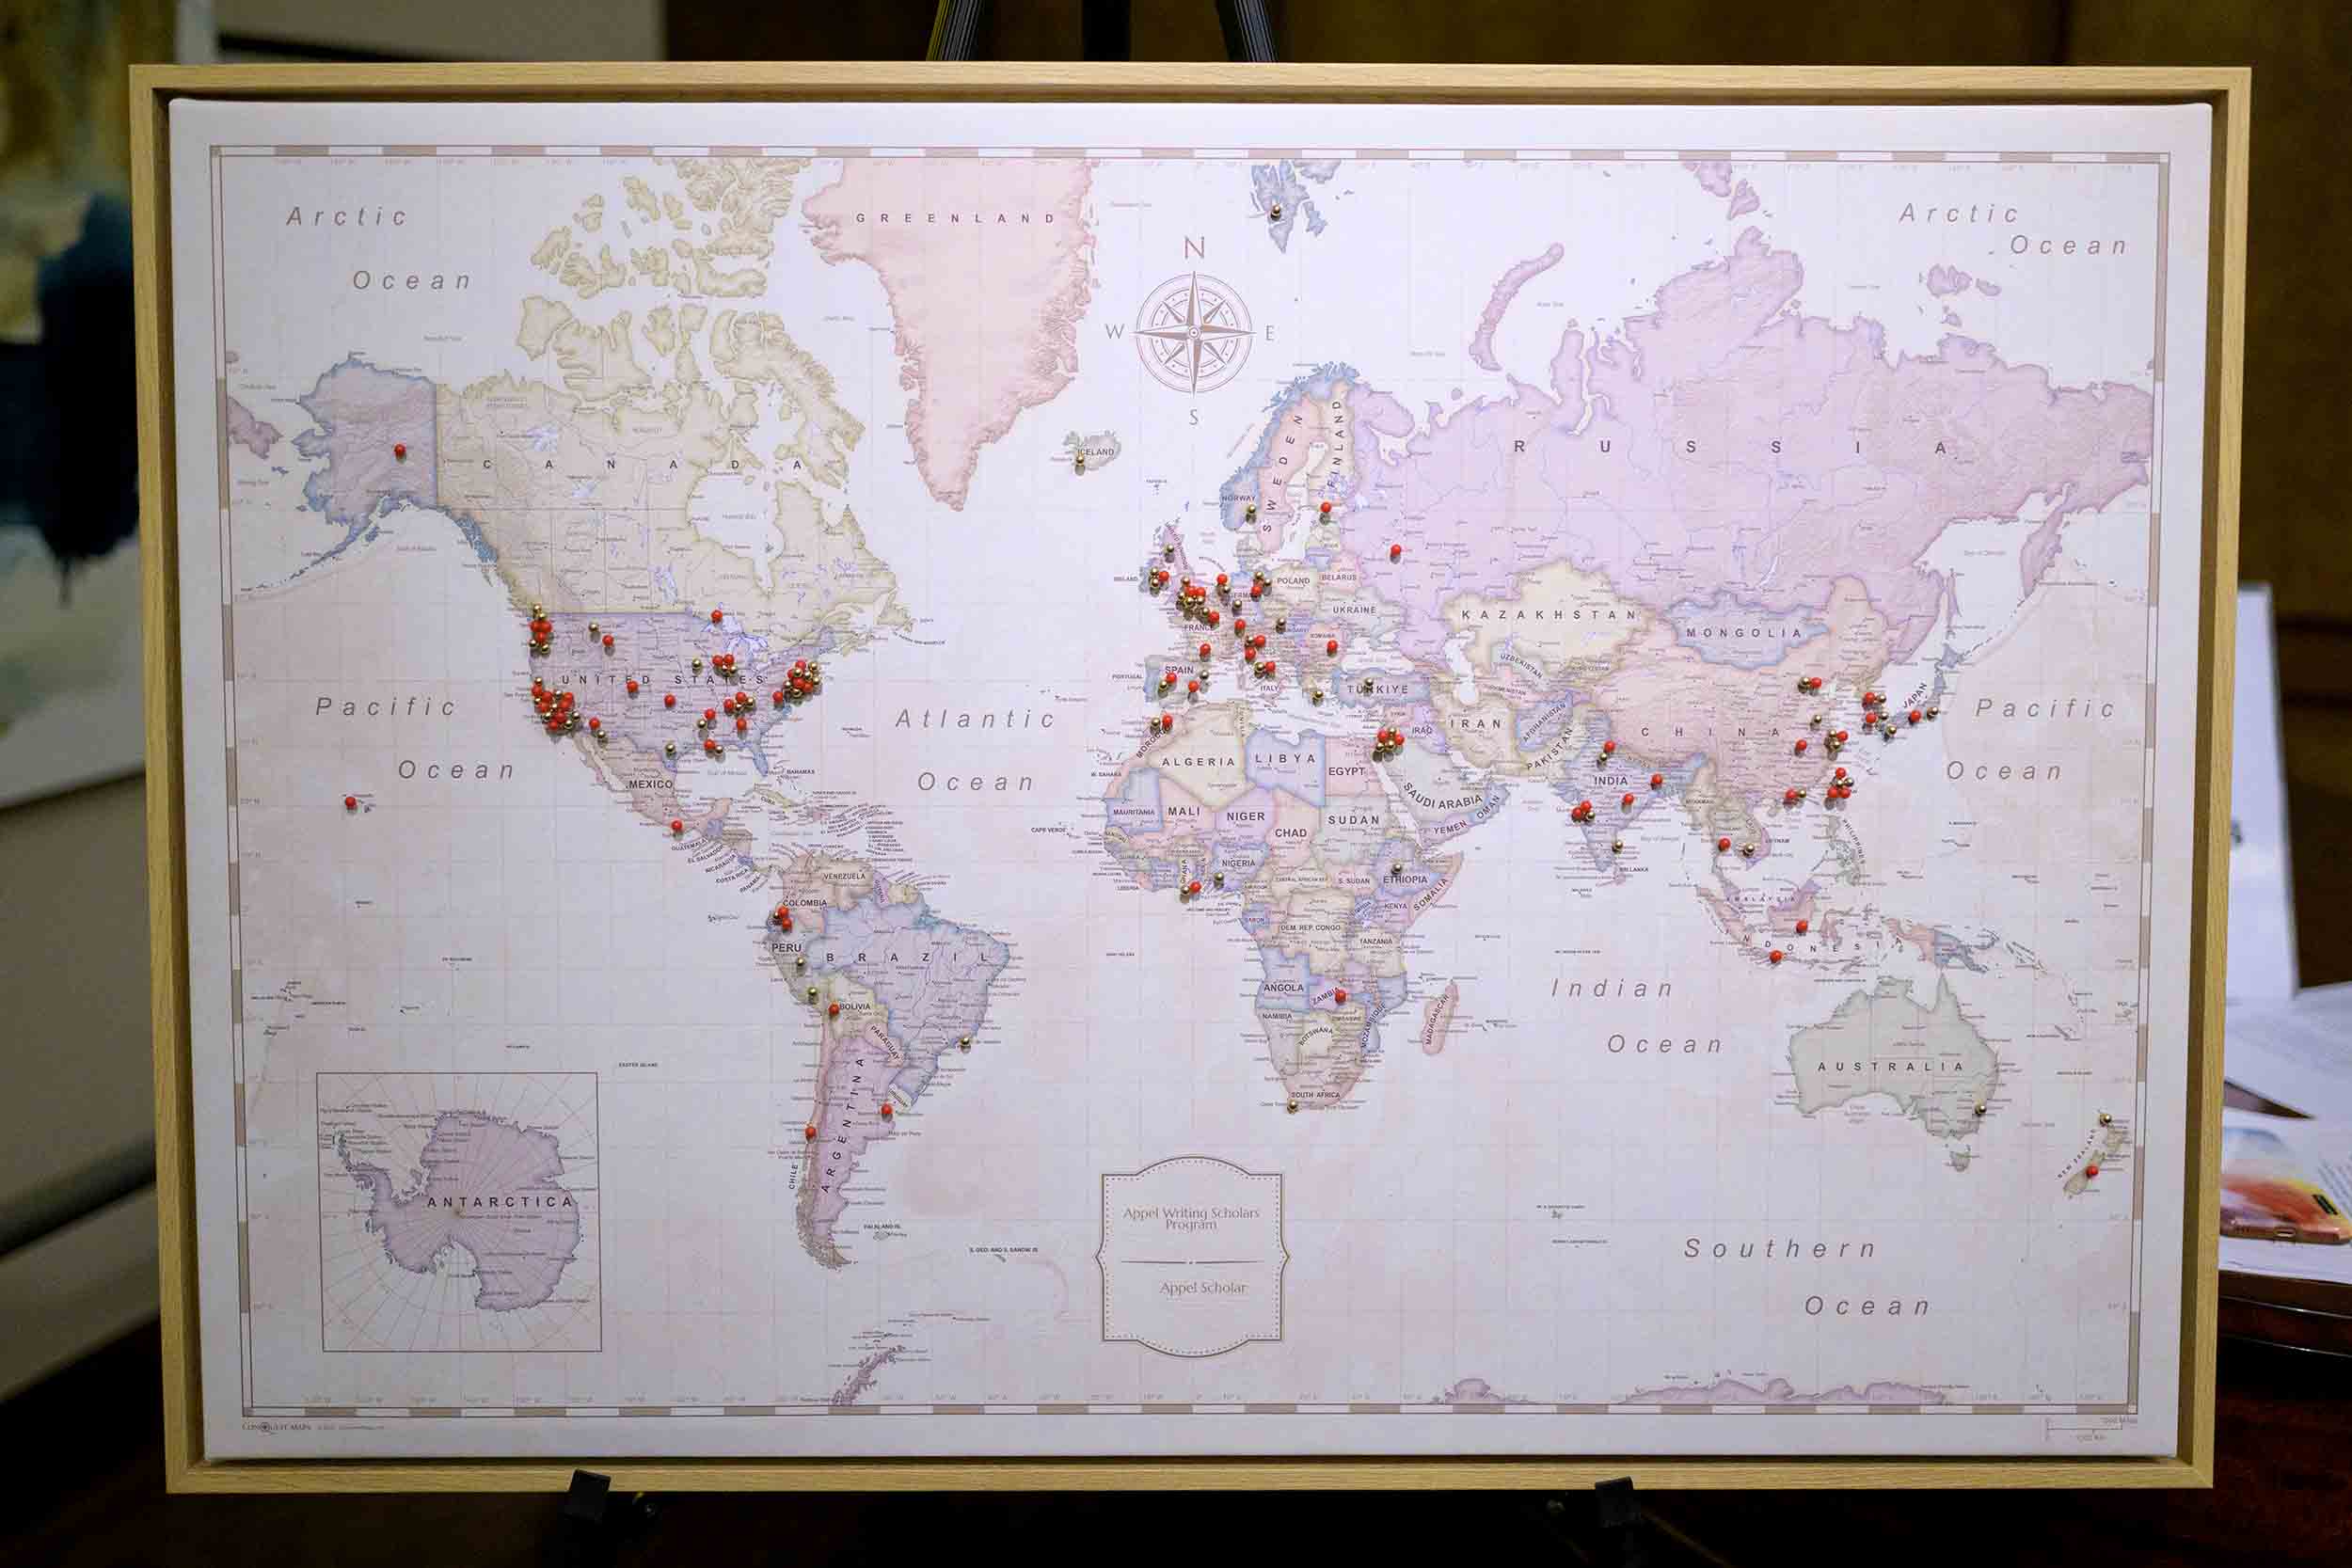 The map presented to Appel as a gift represents the locations where a Fellow has traveled to and written about since 2015.